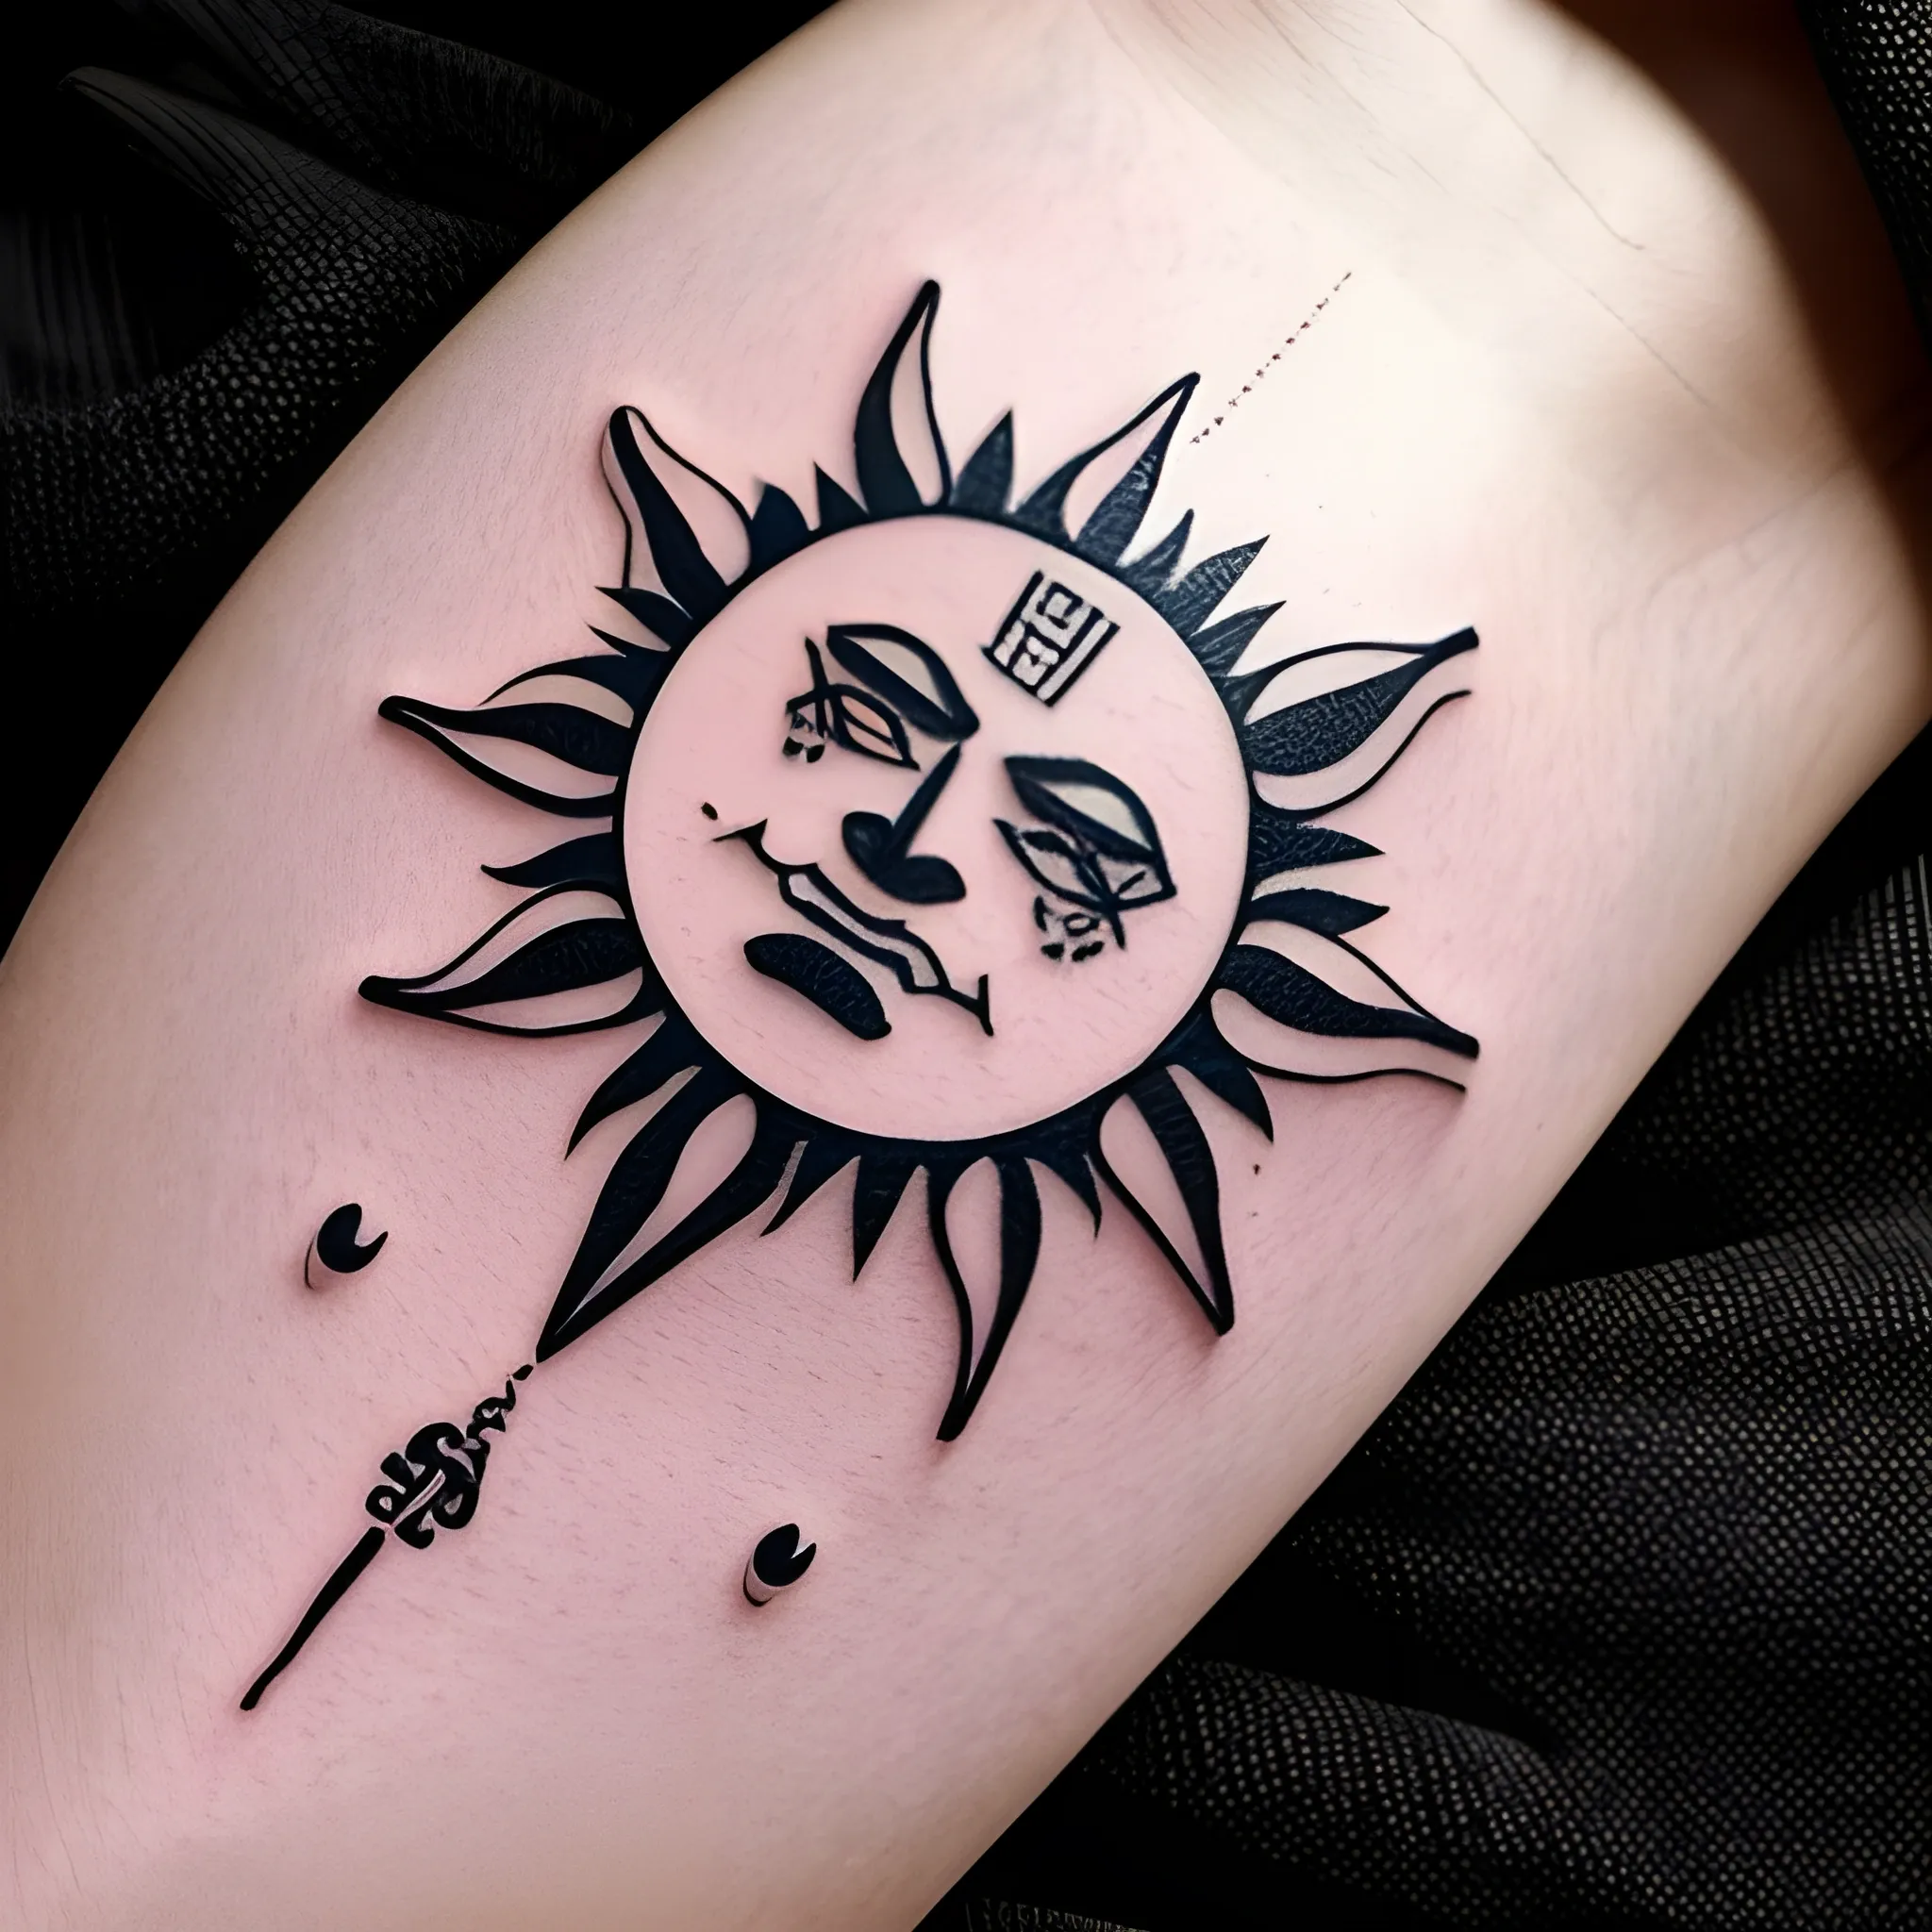 Tattoo uploaded by Pernille John • Minimalist dancing sun and moon tattoo  by Christopher Valquez of West 4 Tattoo #ChristopherValquez #sun&moonTattoo  #smalltattoo #fineline #dancing #sun #moon #matchingtattoo • Tattoodo